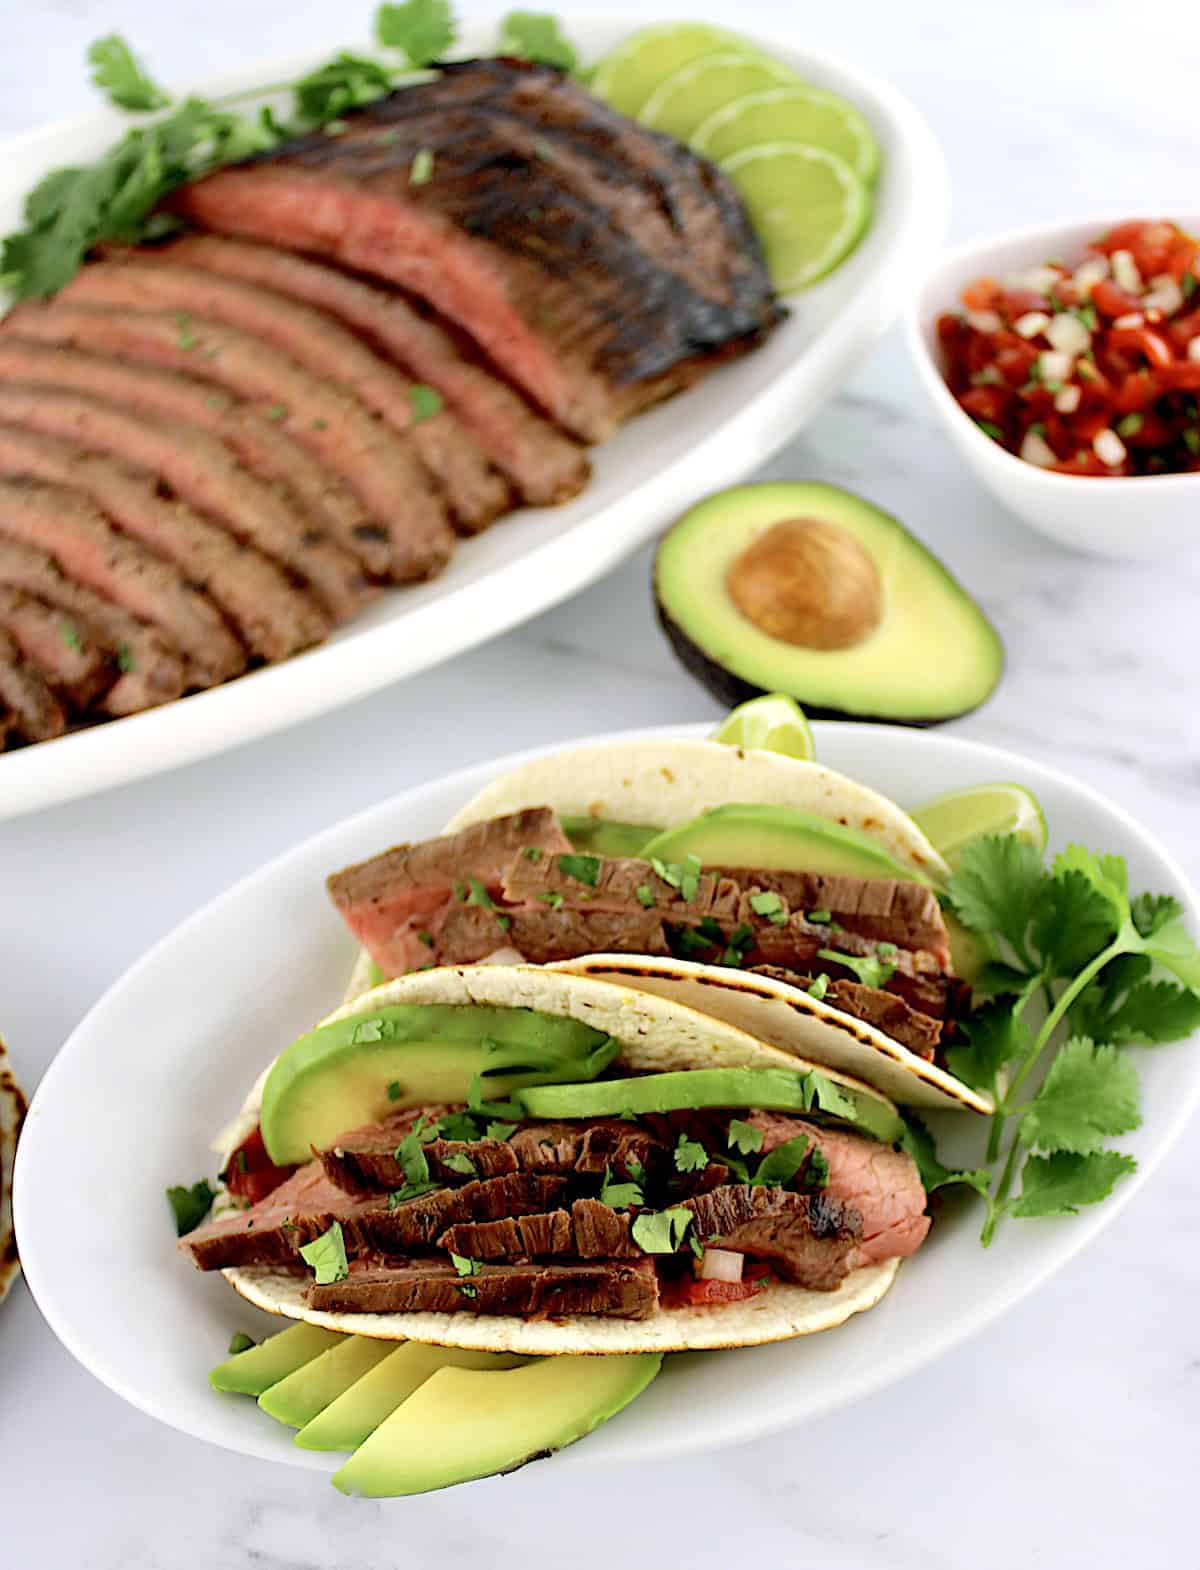 Carne Asada in 2 tacoes with avocado slices with sliced flank steak in background